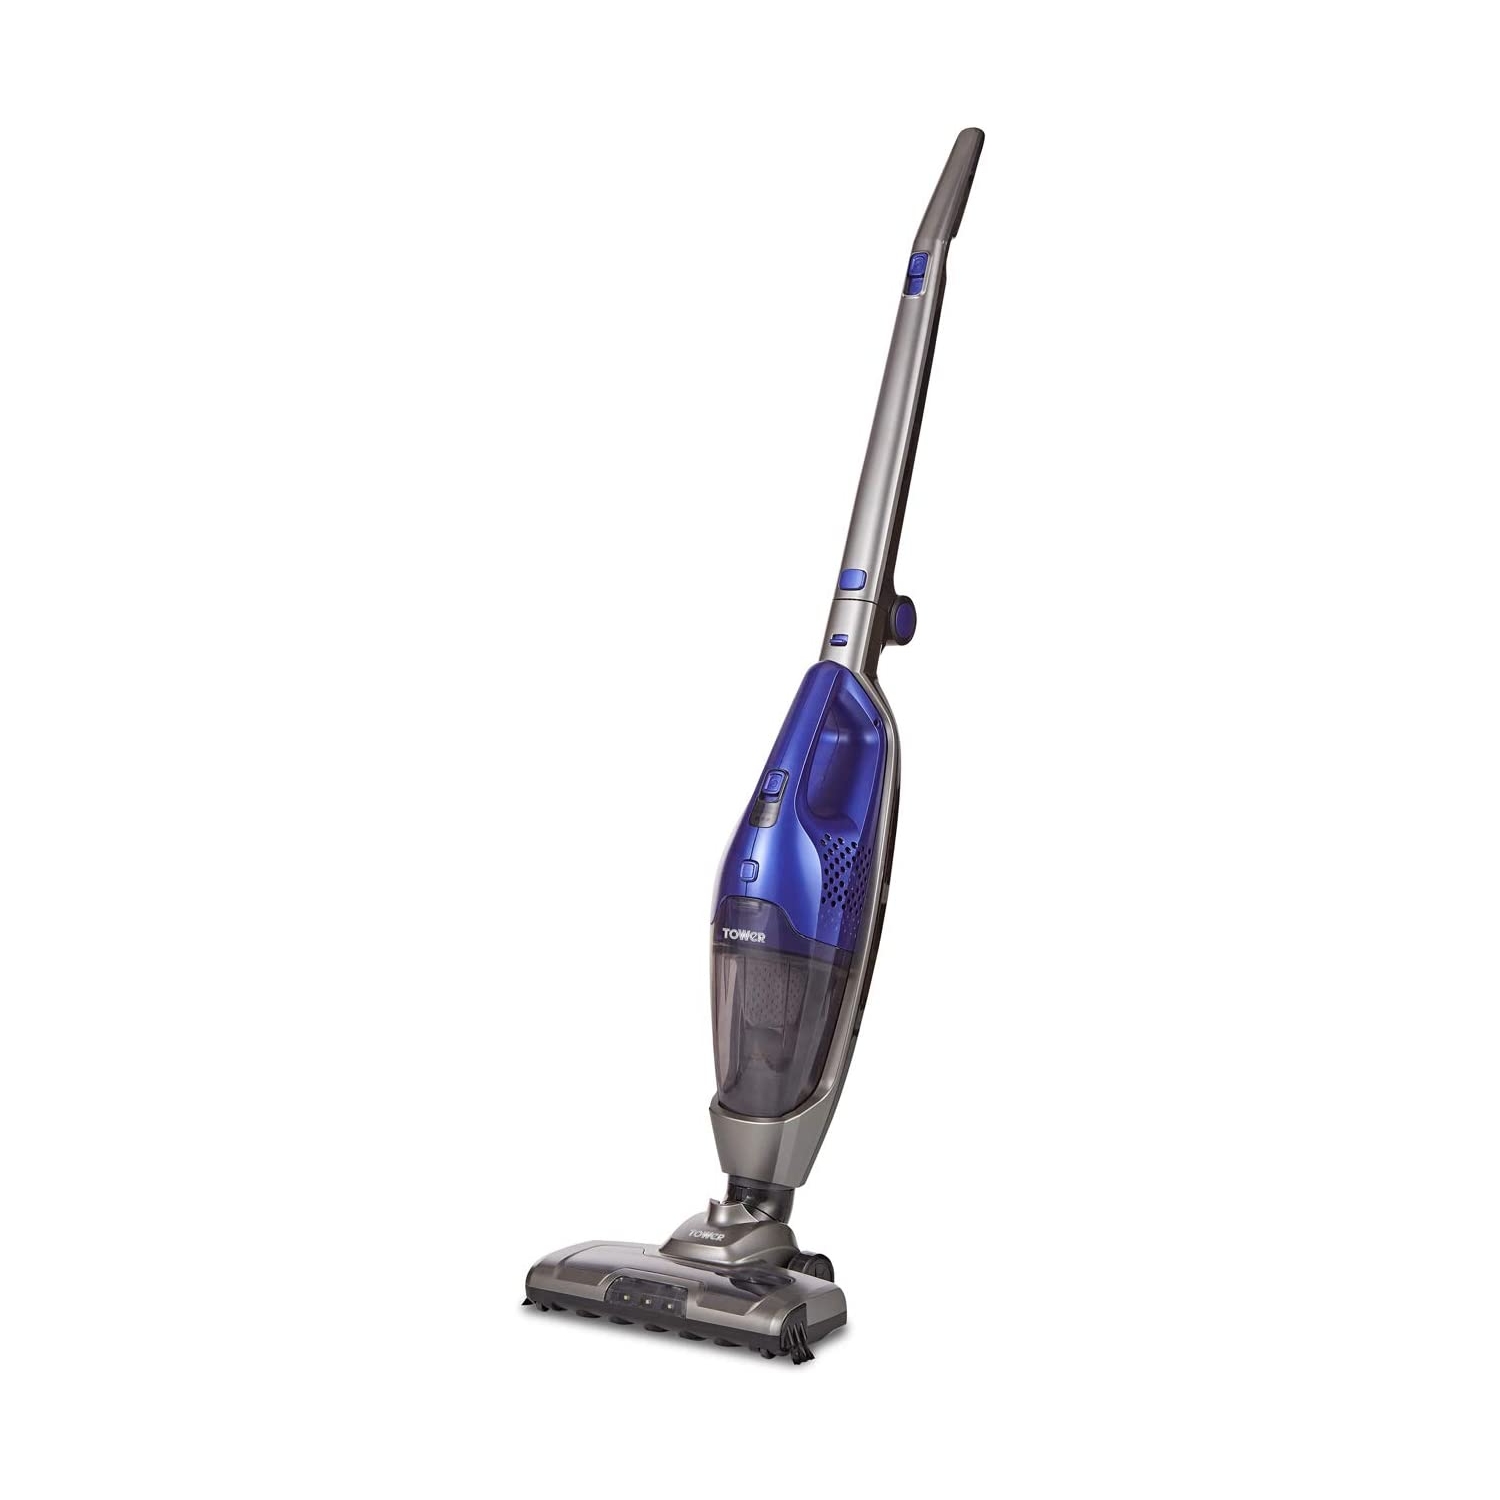 Tower Cordless 2-in-1 Stick Vacuum Cleaner - 0